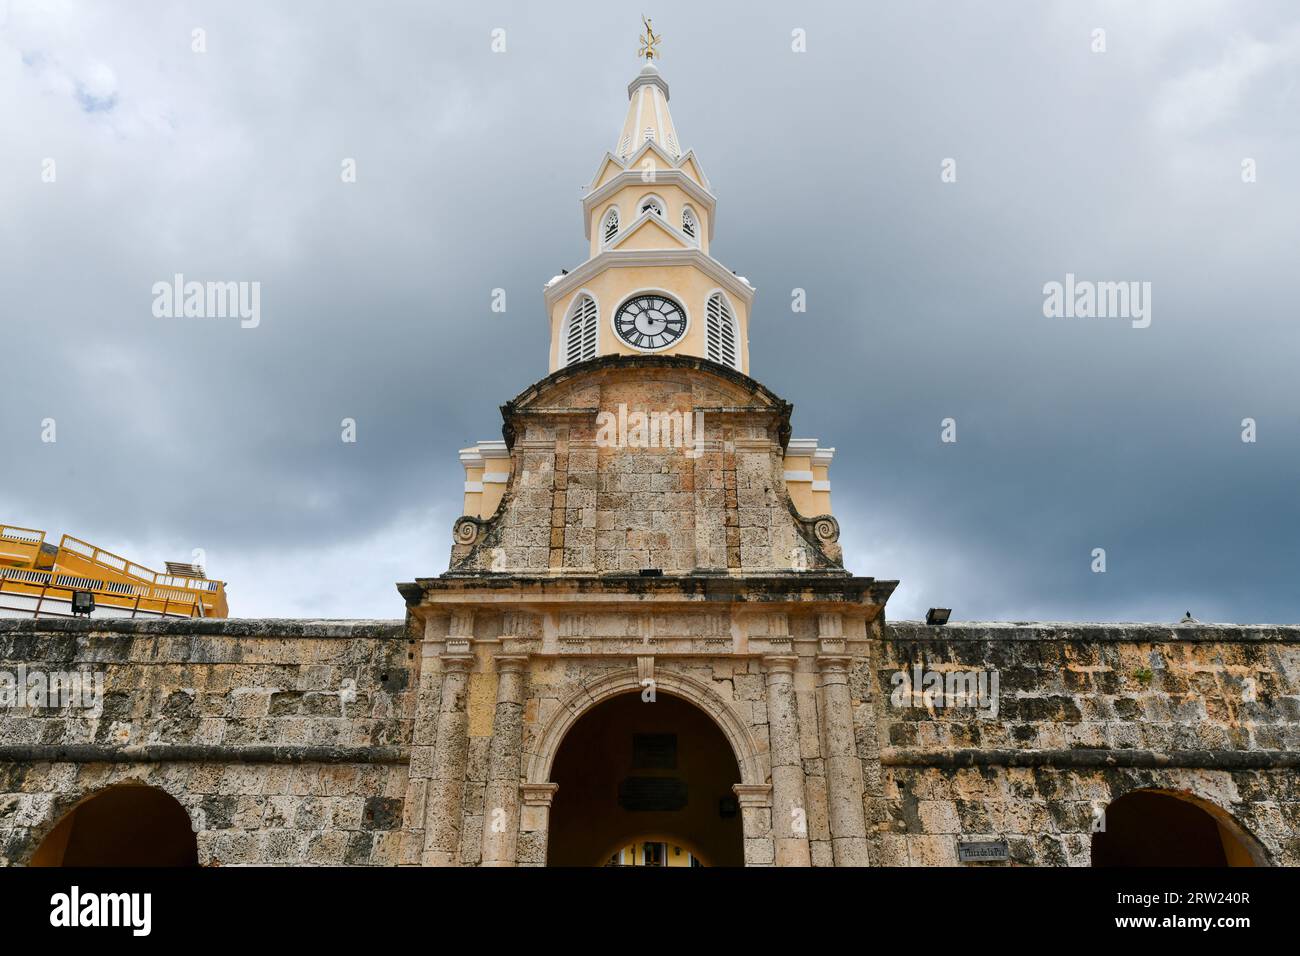 Plaza de los Coches in the Walled City of Cartagena, Colombia. Stock Photo